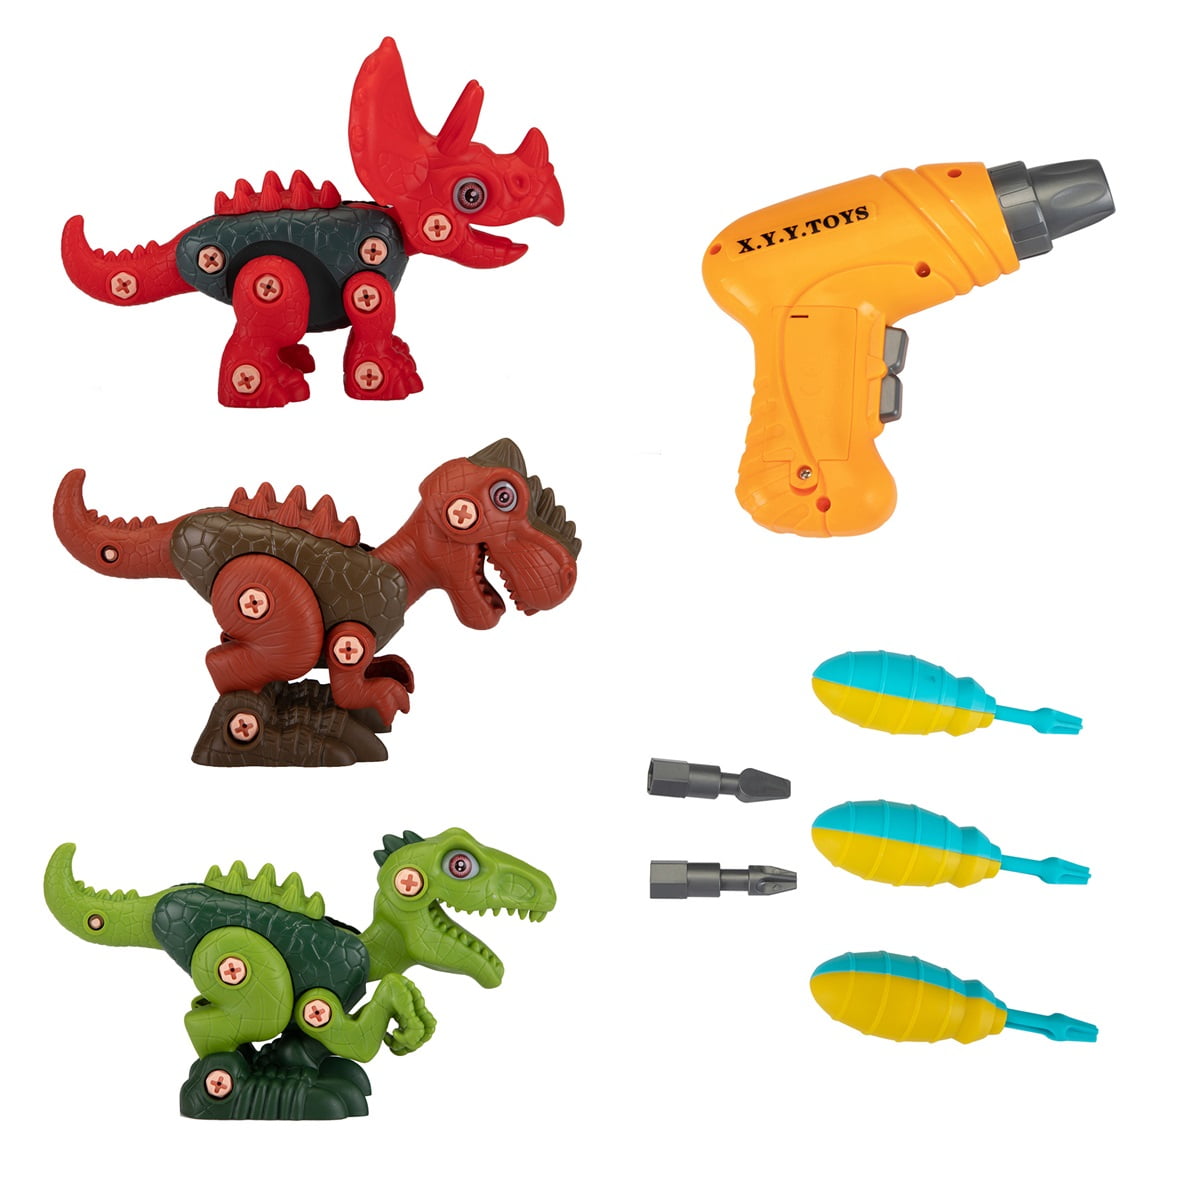 Canddidliike 3 in 1 Assembled Dinosaur Toy, Puzzle Dinosaur Toy Set DIY - Multi-color